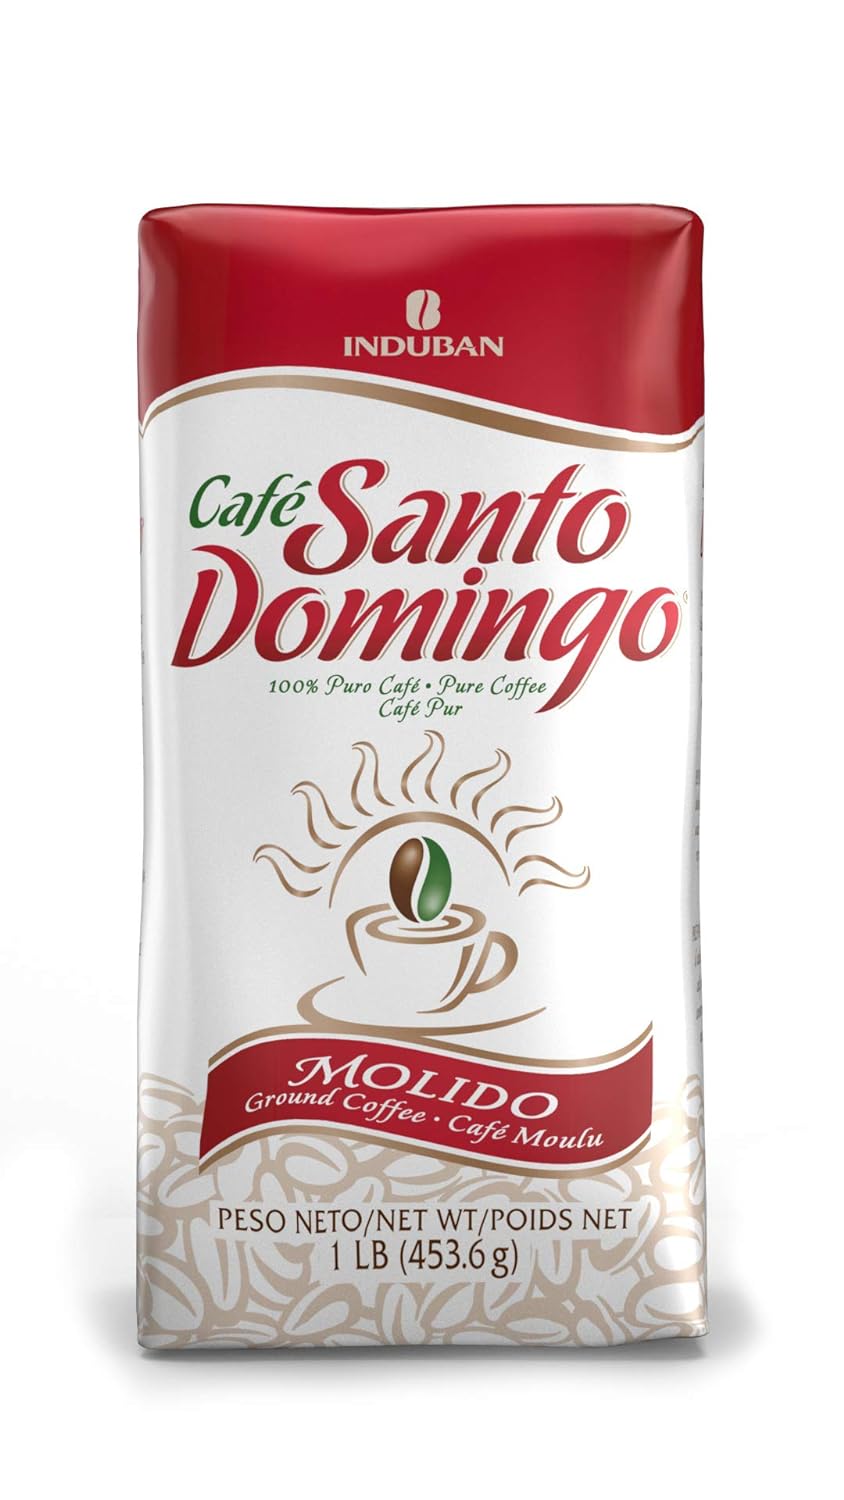 Café Santo Domingo, 16 oz Bag, Ground Coffee, Medium Roast - Product from the Dominican Republic (Pack of 1)